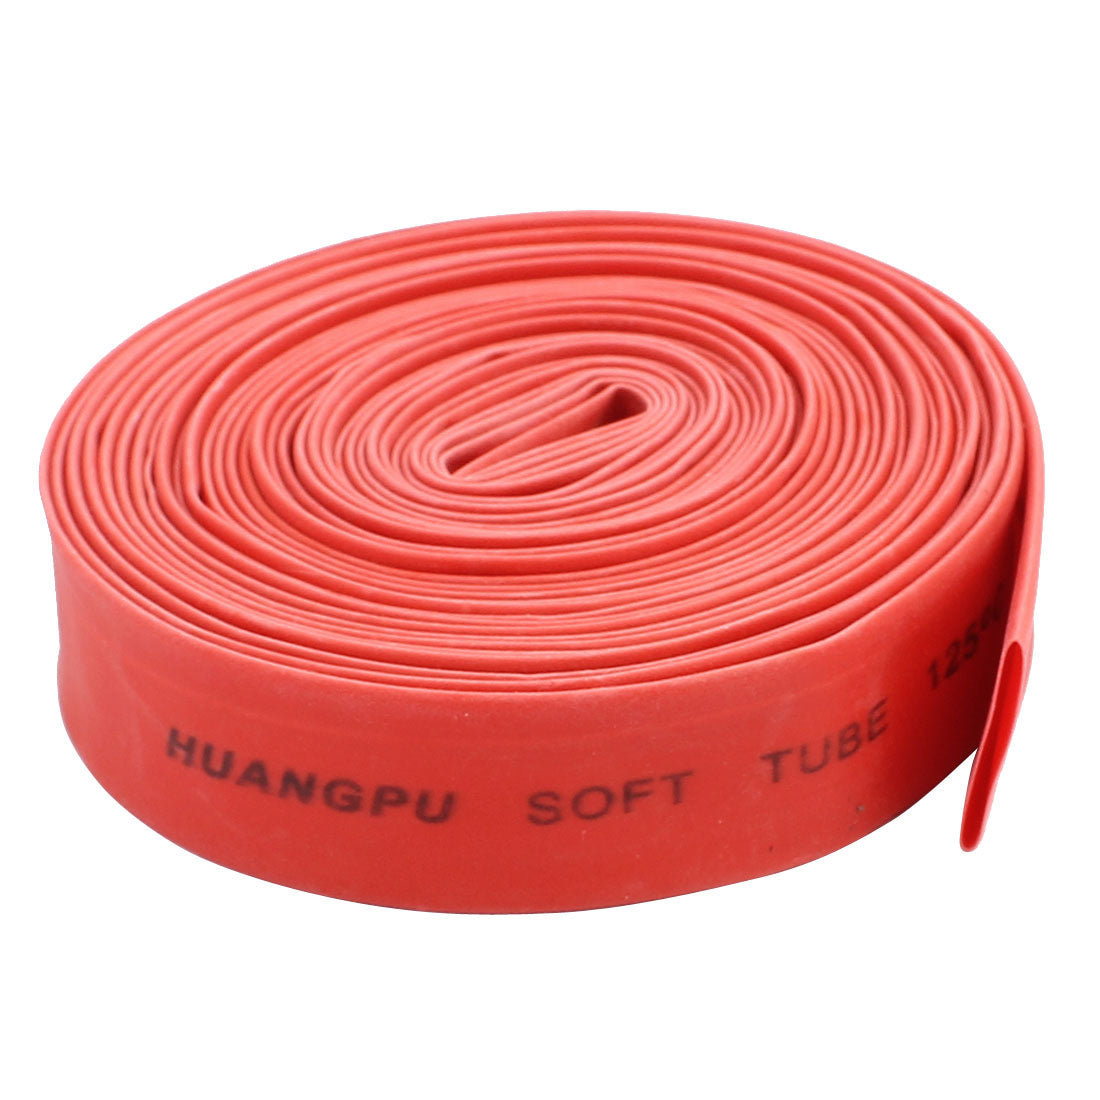 uxcell Uxcell 10mm Diameter 125C PVC Heat Shrink Tube Tubing Battery Wrap Red 3.9M Length